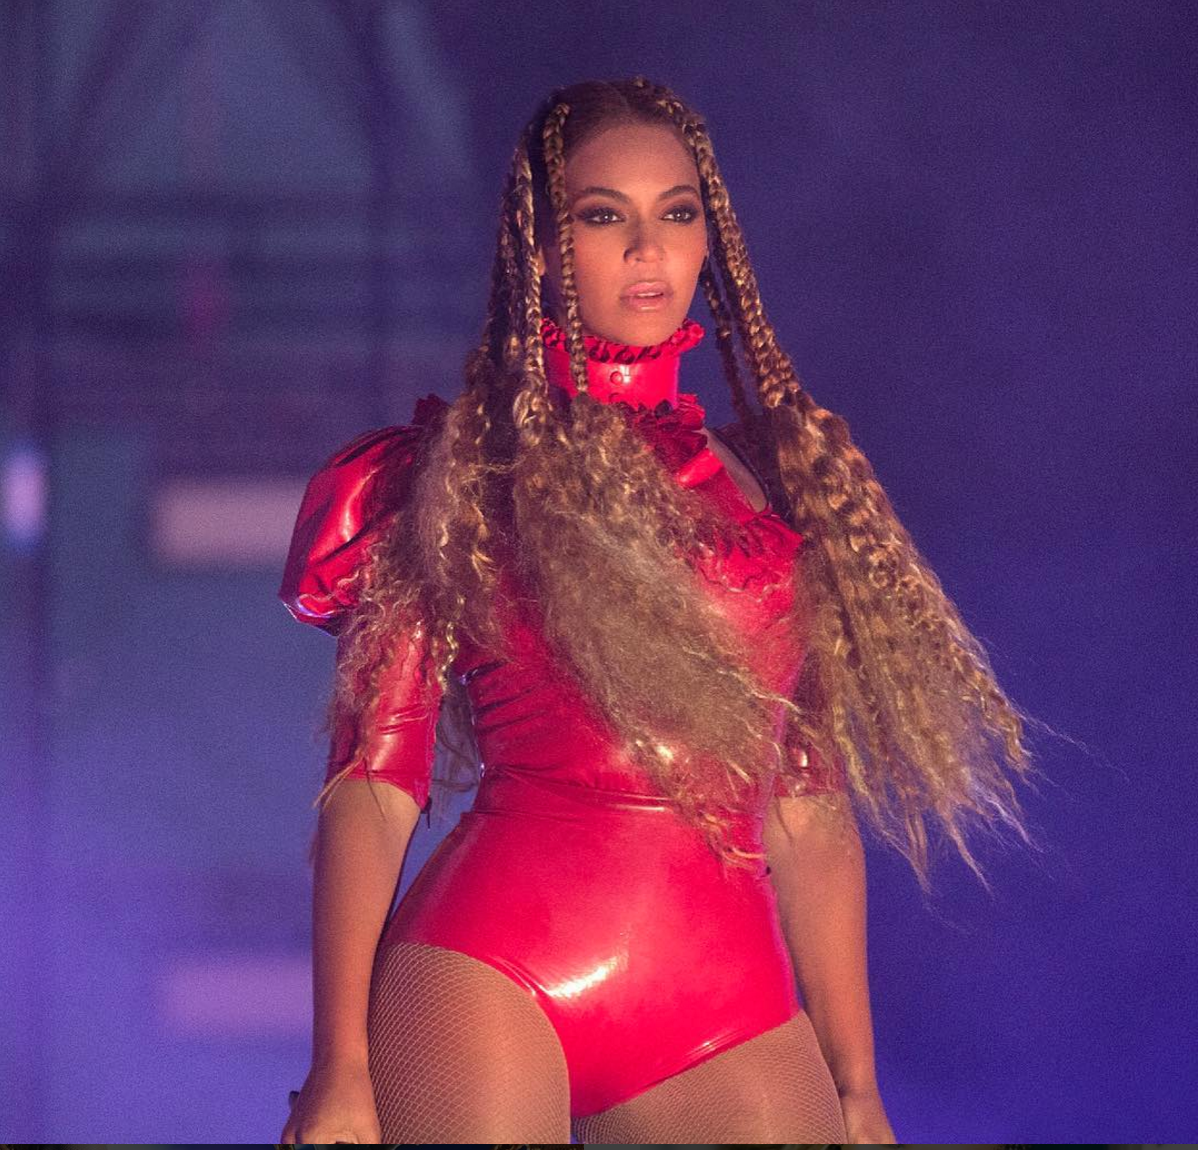 All Of The Key Hair Moments From Beyonce’s Birthday Disco
